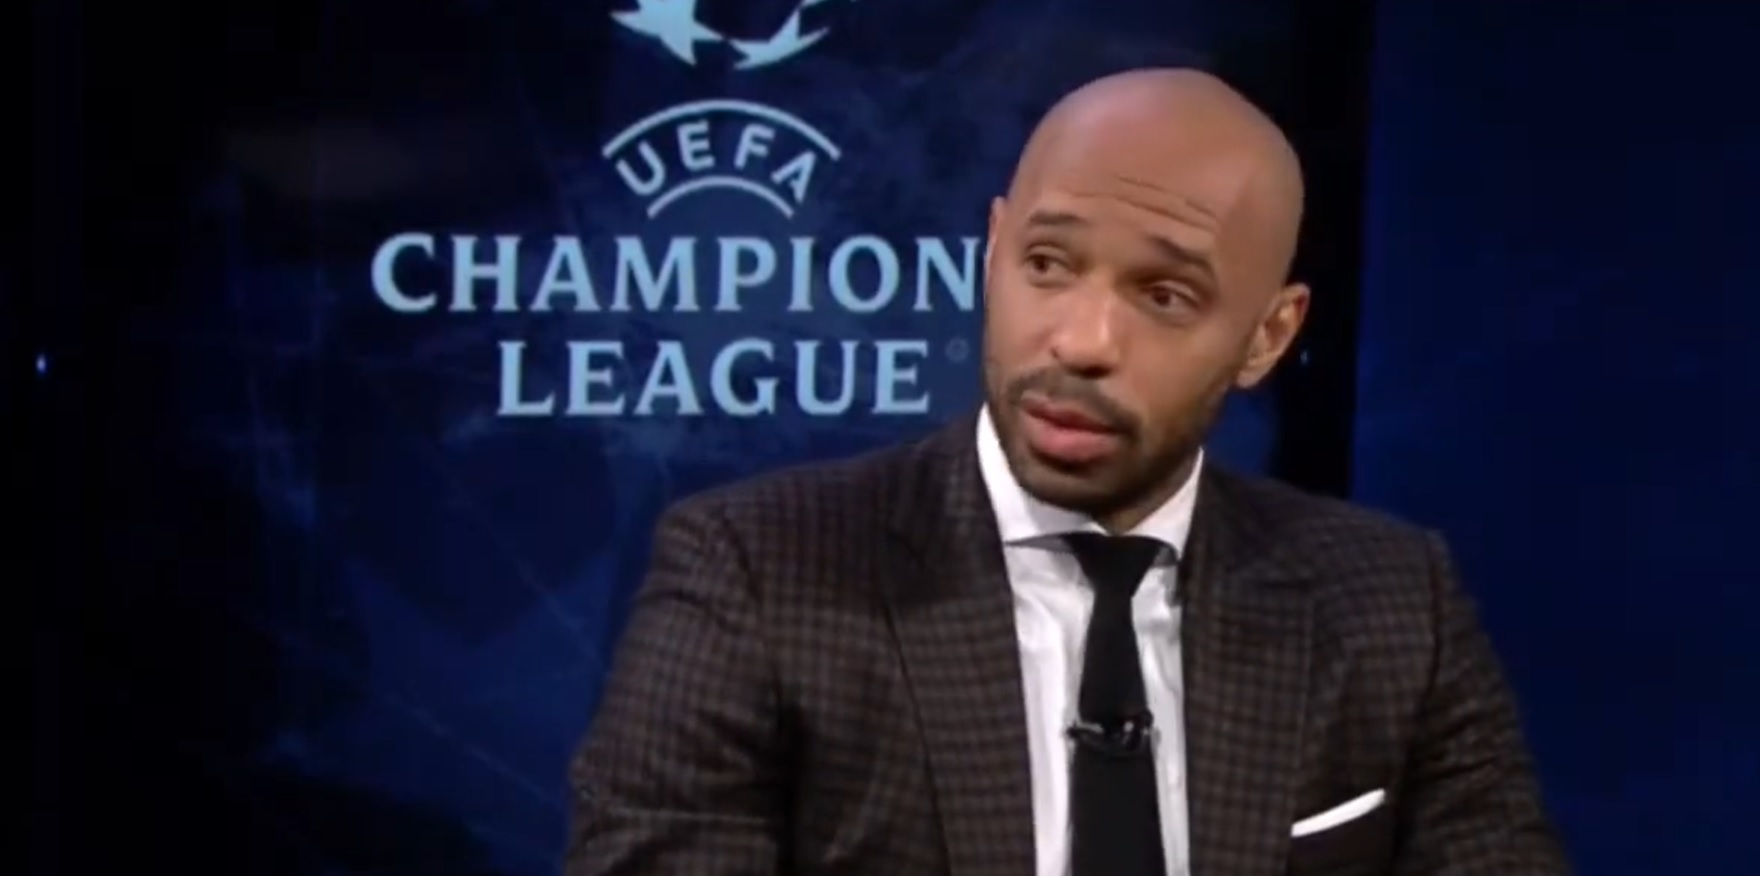 (Video) Thierry Henry backs battle between Ballon d’Or contenders to add ‘spice’ to Liverpool v Real Madrid – not Mo Salah